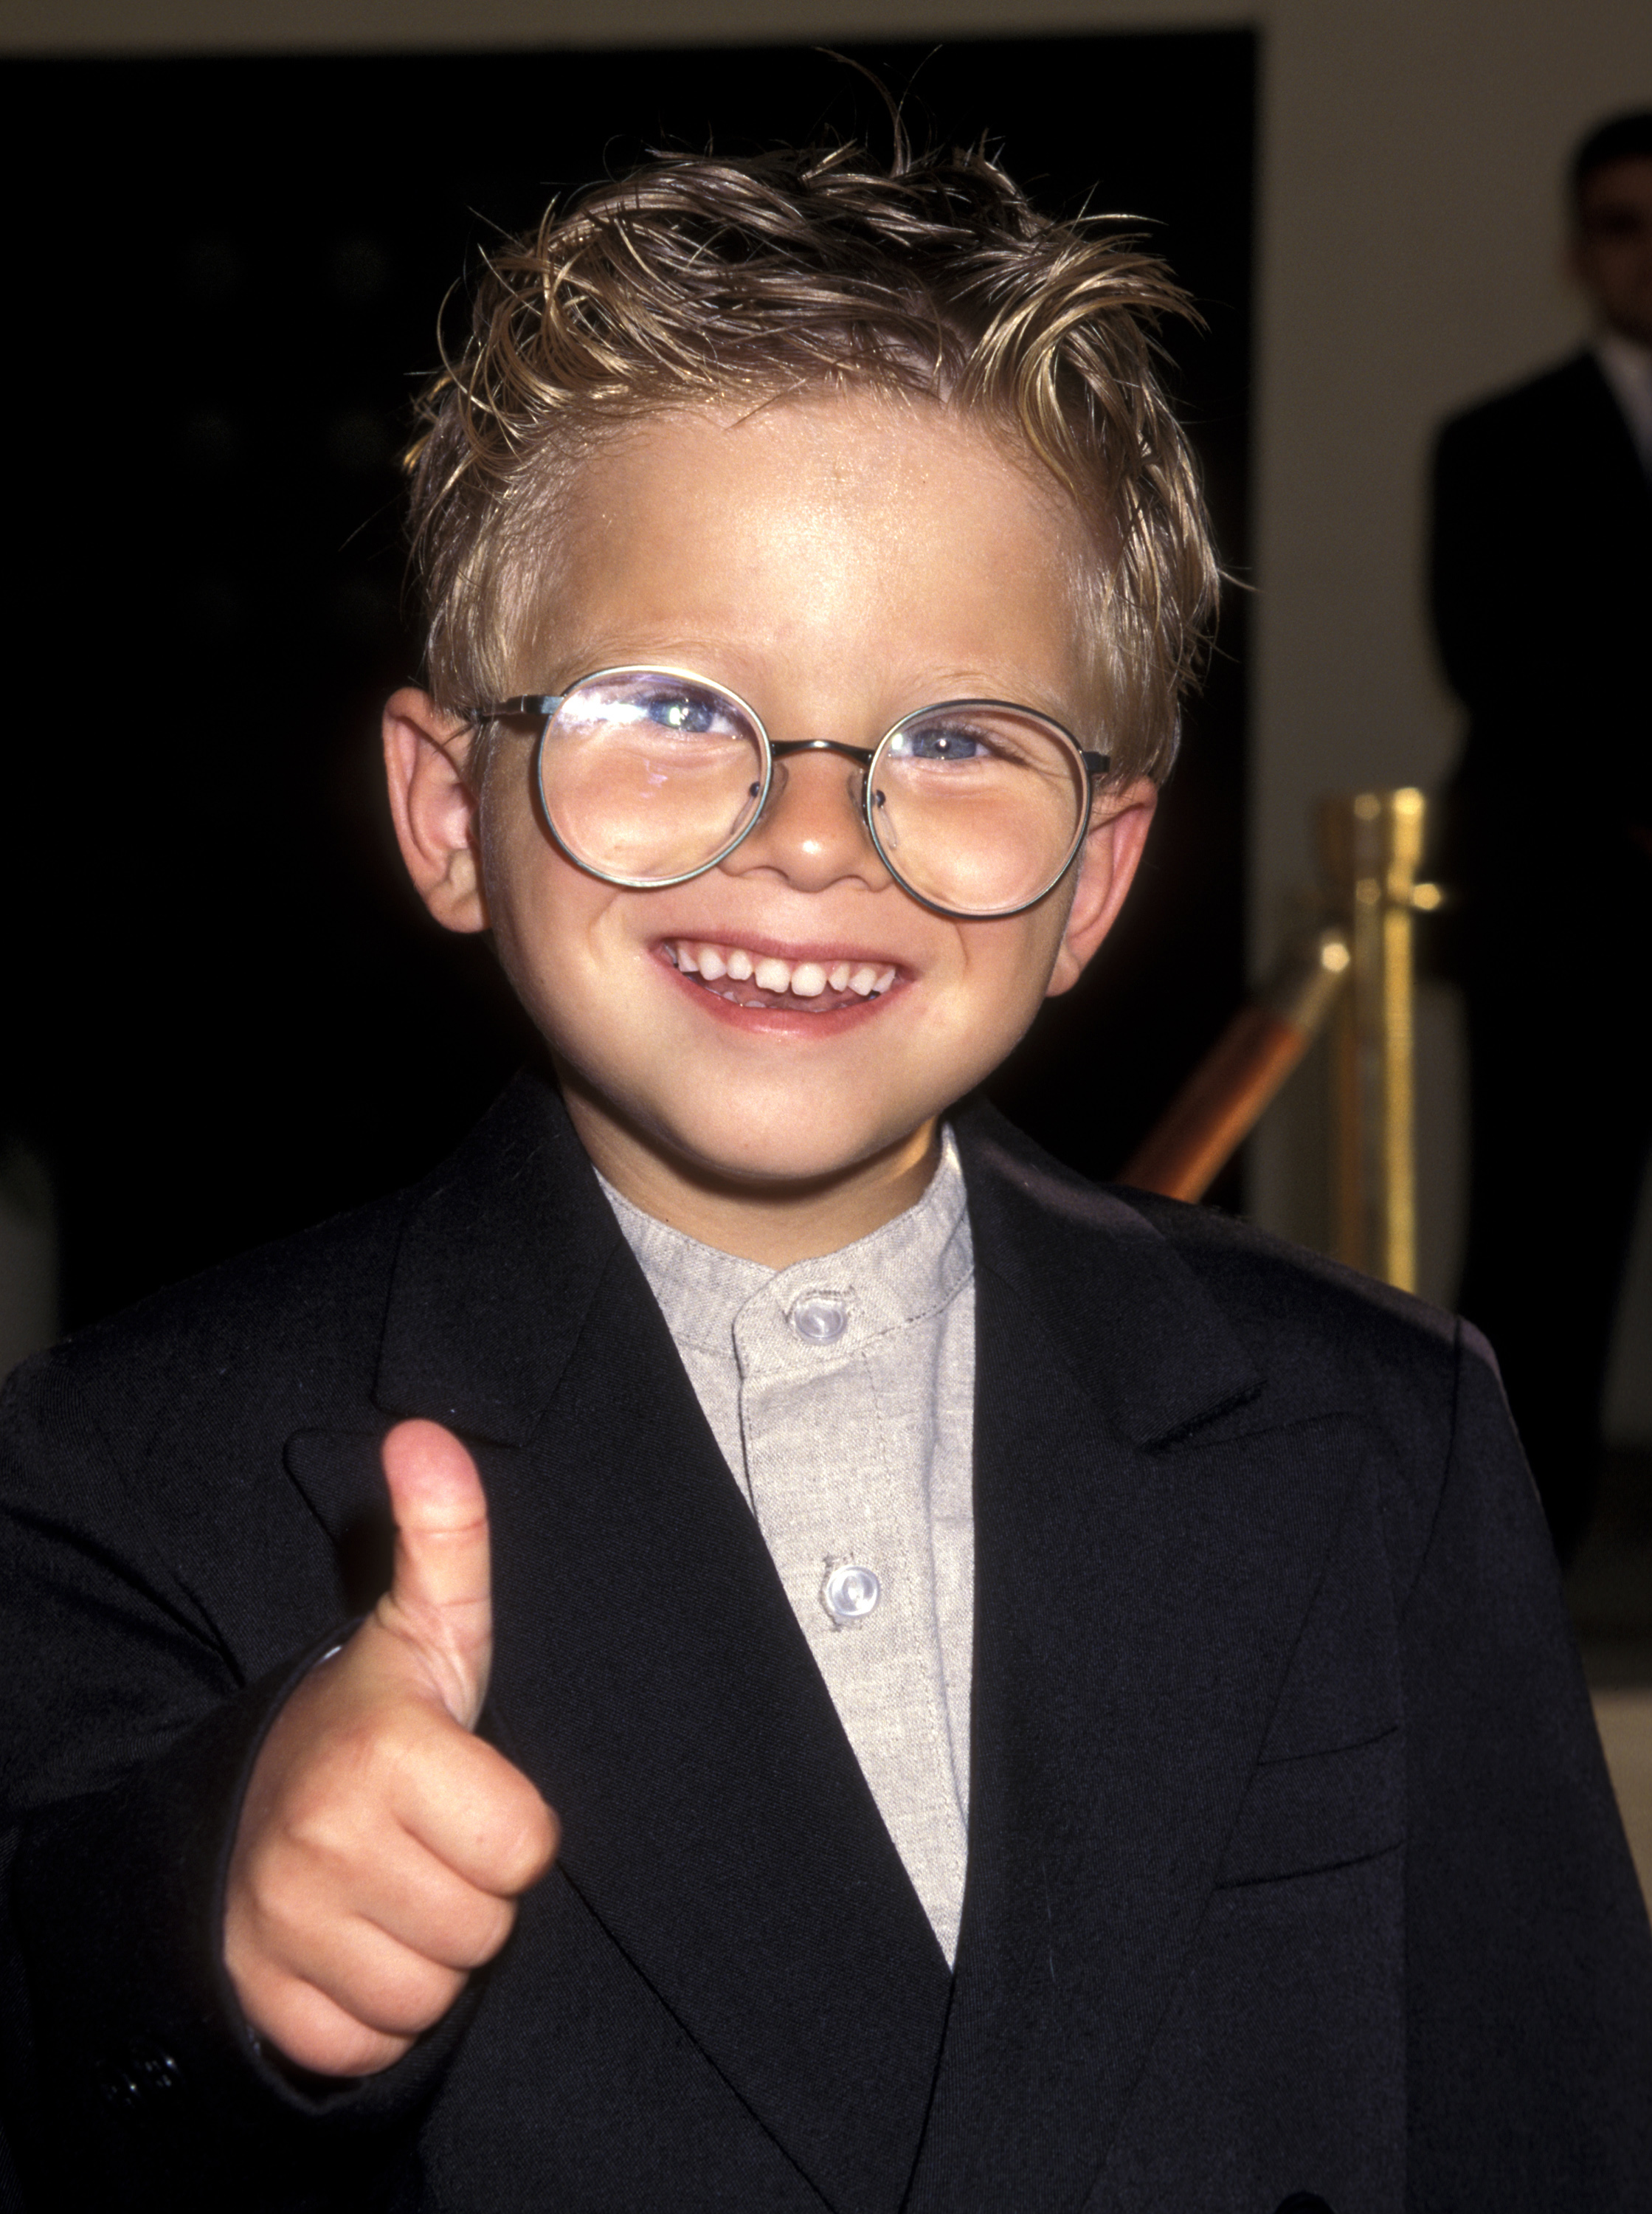 The child actor in May 1997 | Source: Getty Images